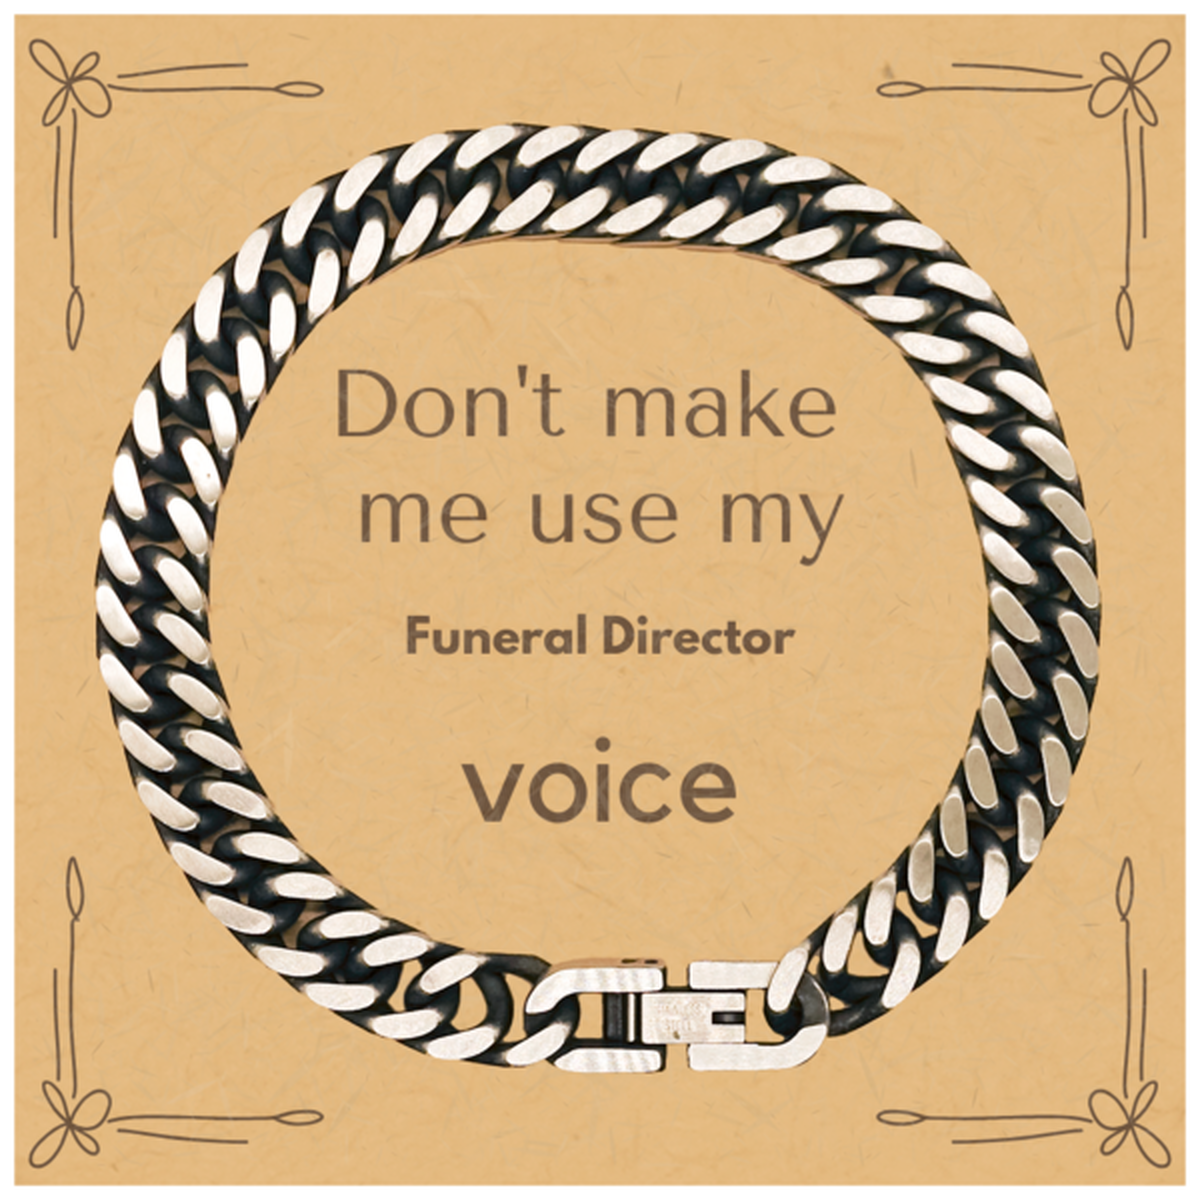 Don't make me use my Funeral Director voice, Sarcasm Funeral Director Card Gifts, Christmas Funeral Director Cuban Link Chain Bracelet Birthday Unique Gifts For Funeral Director Coworkers, Men, Women, Colleague, Friends